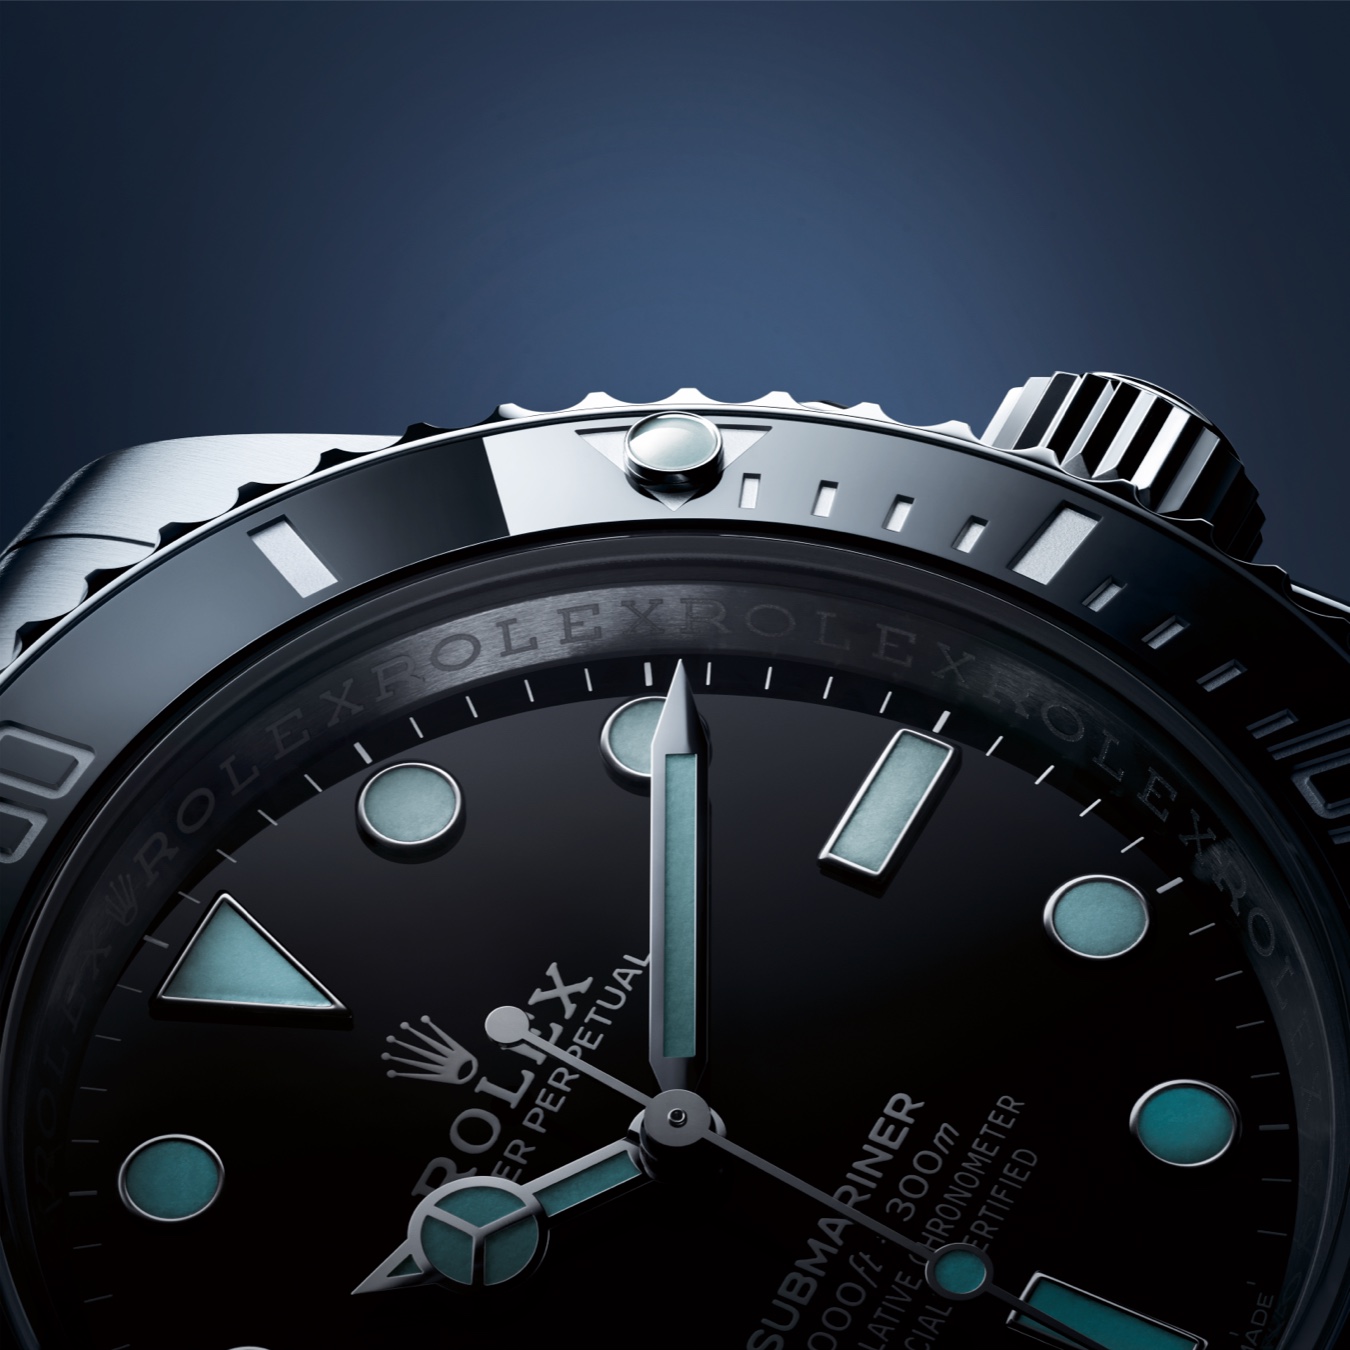 Close up on Rolex Oyster Perpetual watch with black dial and light blue details